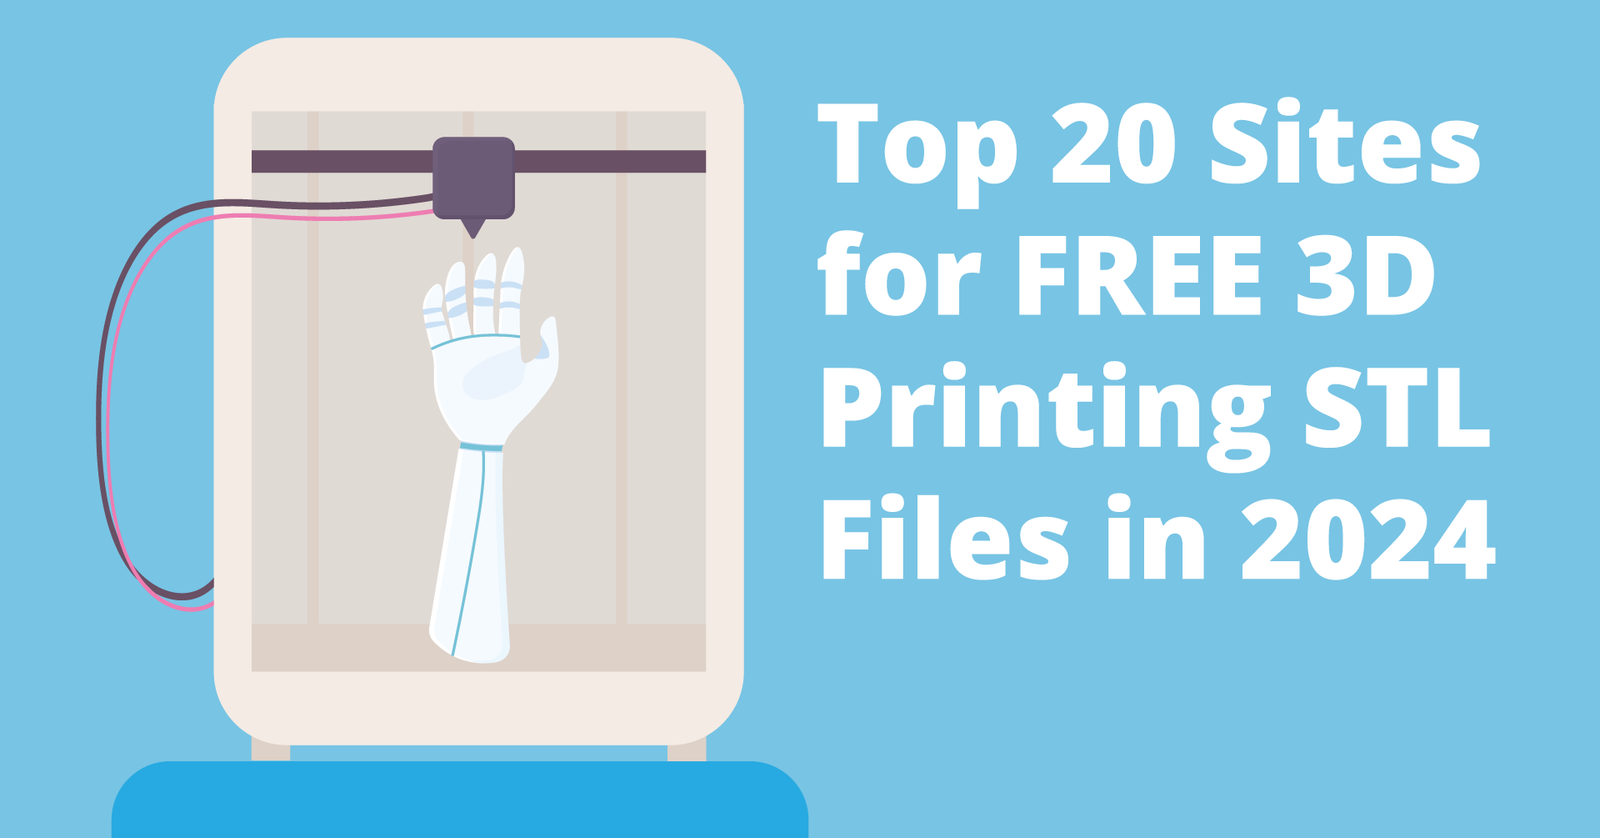 Top 20 Sites for FREE 3D Printing STL Files in 2024